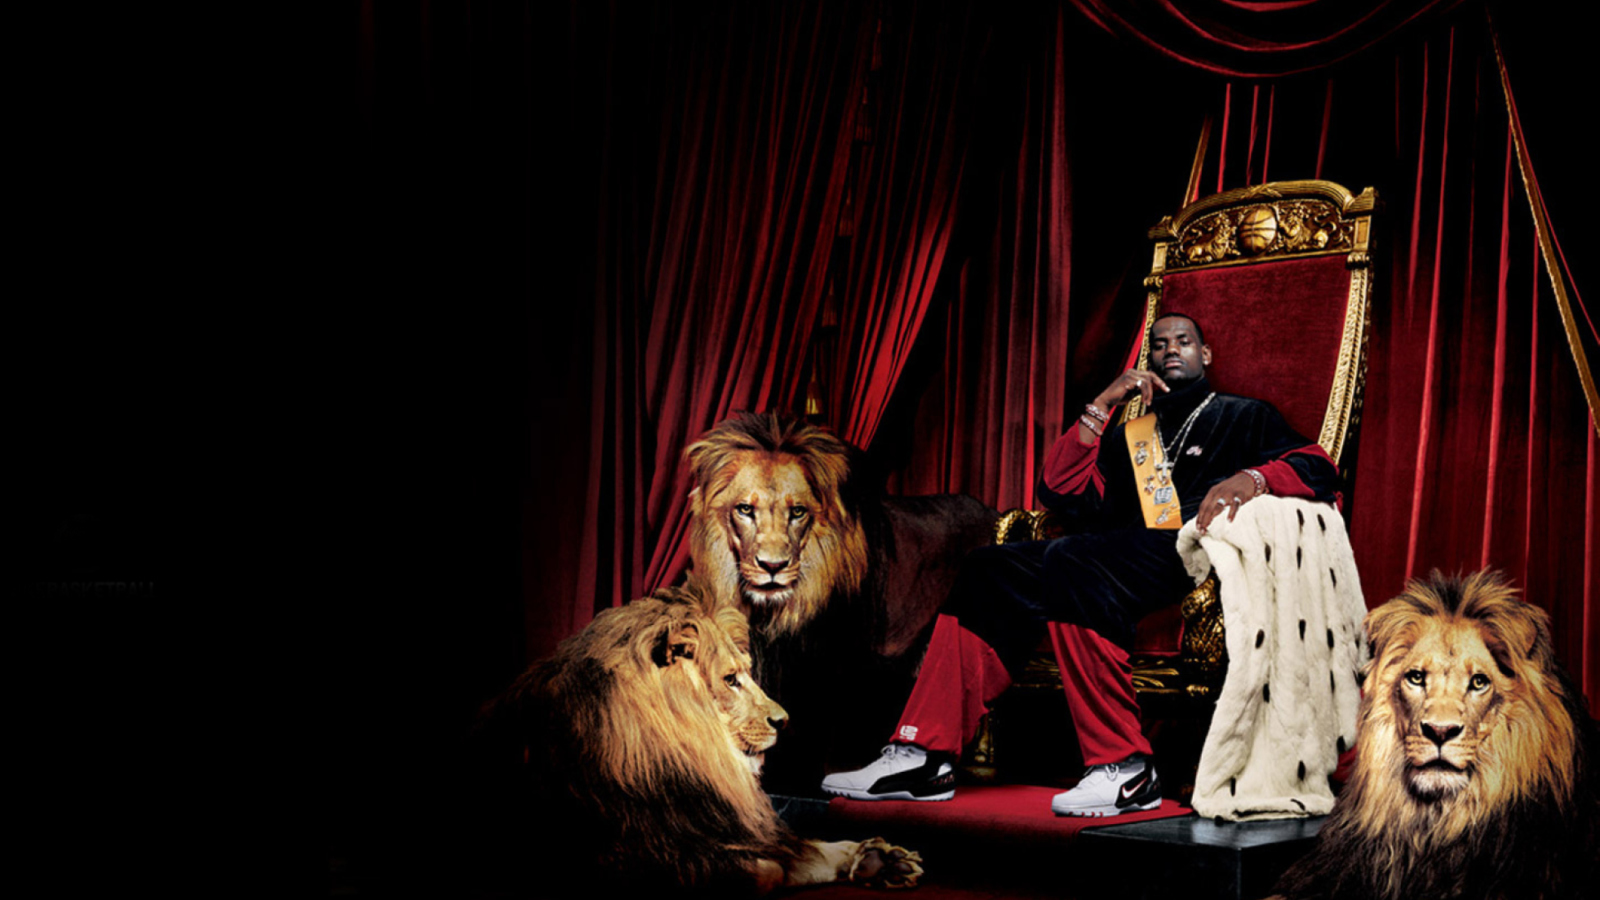 Lebron James With Lions wallpaper 1600x900